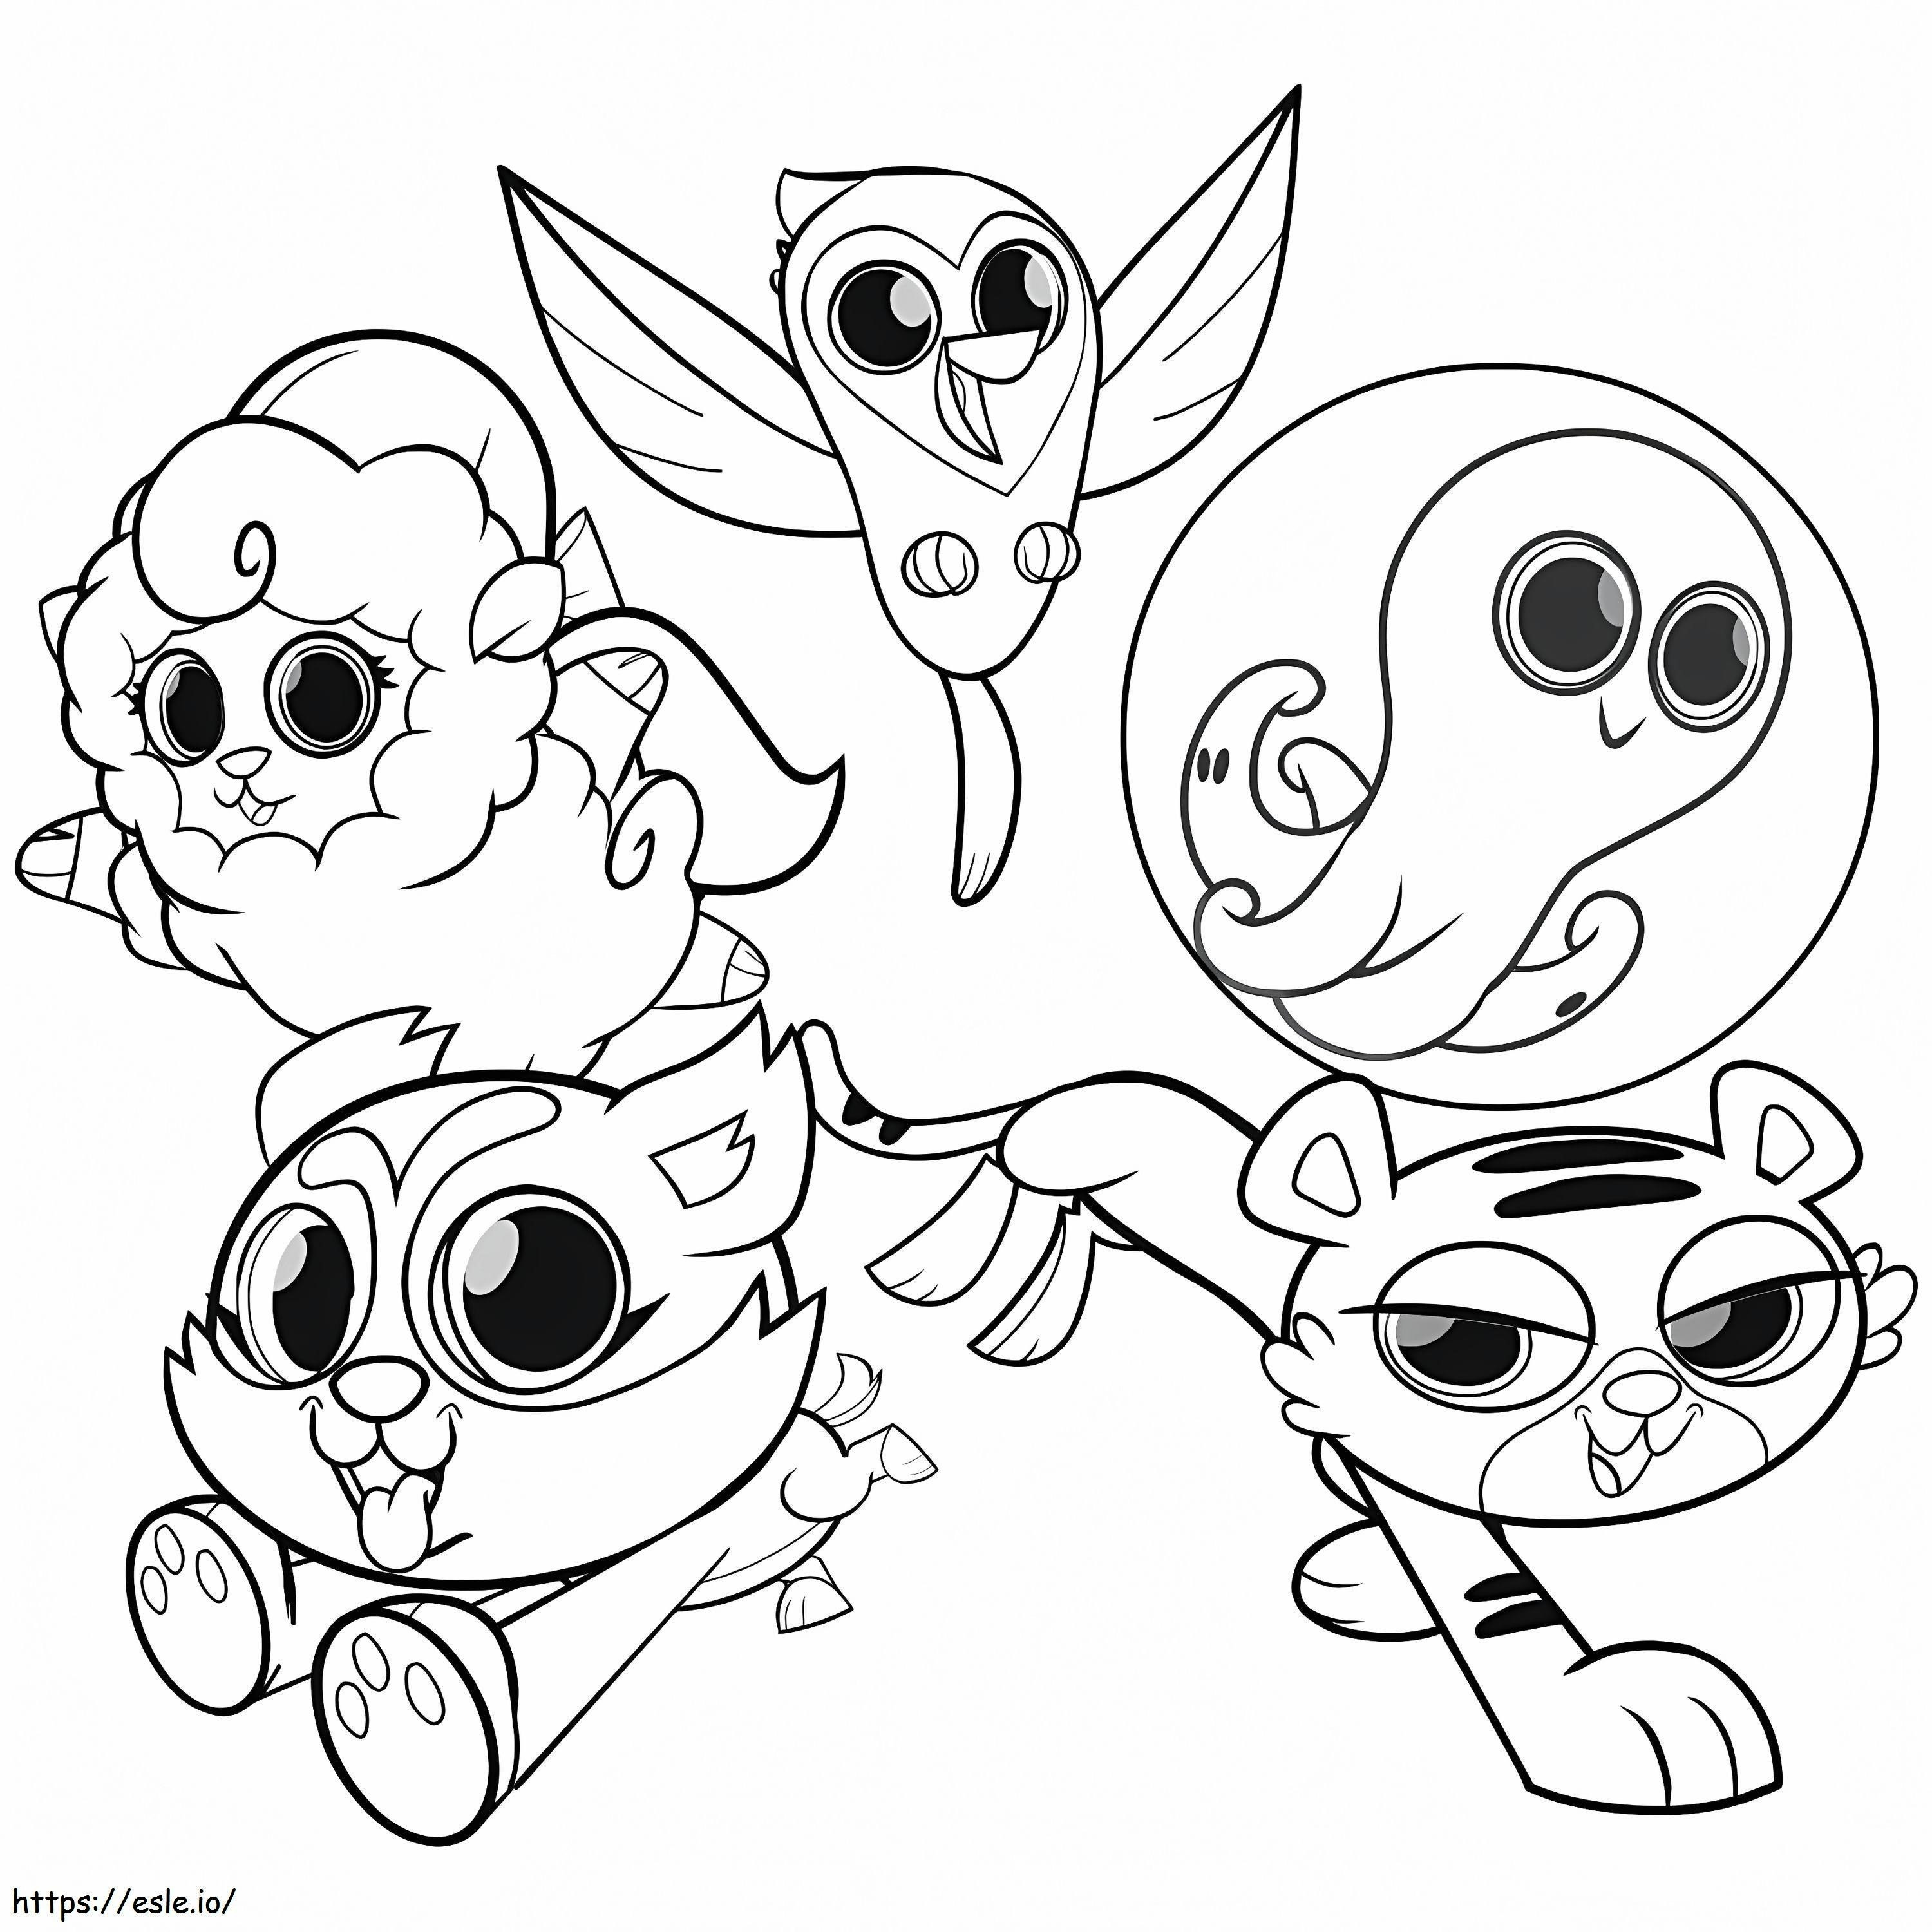 Cute Animals Squinkies coloring page